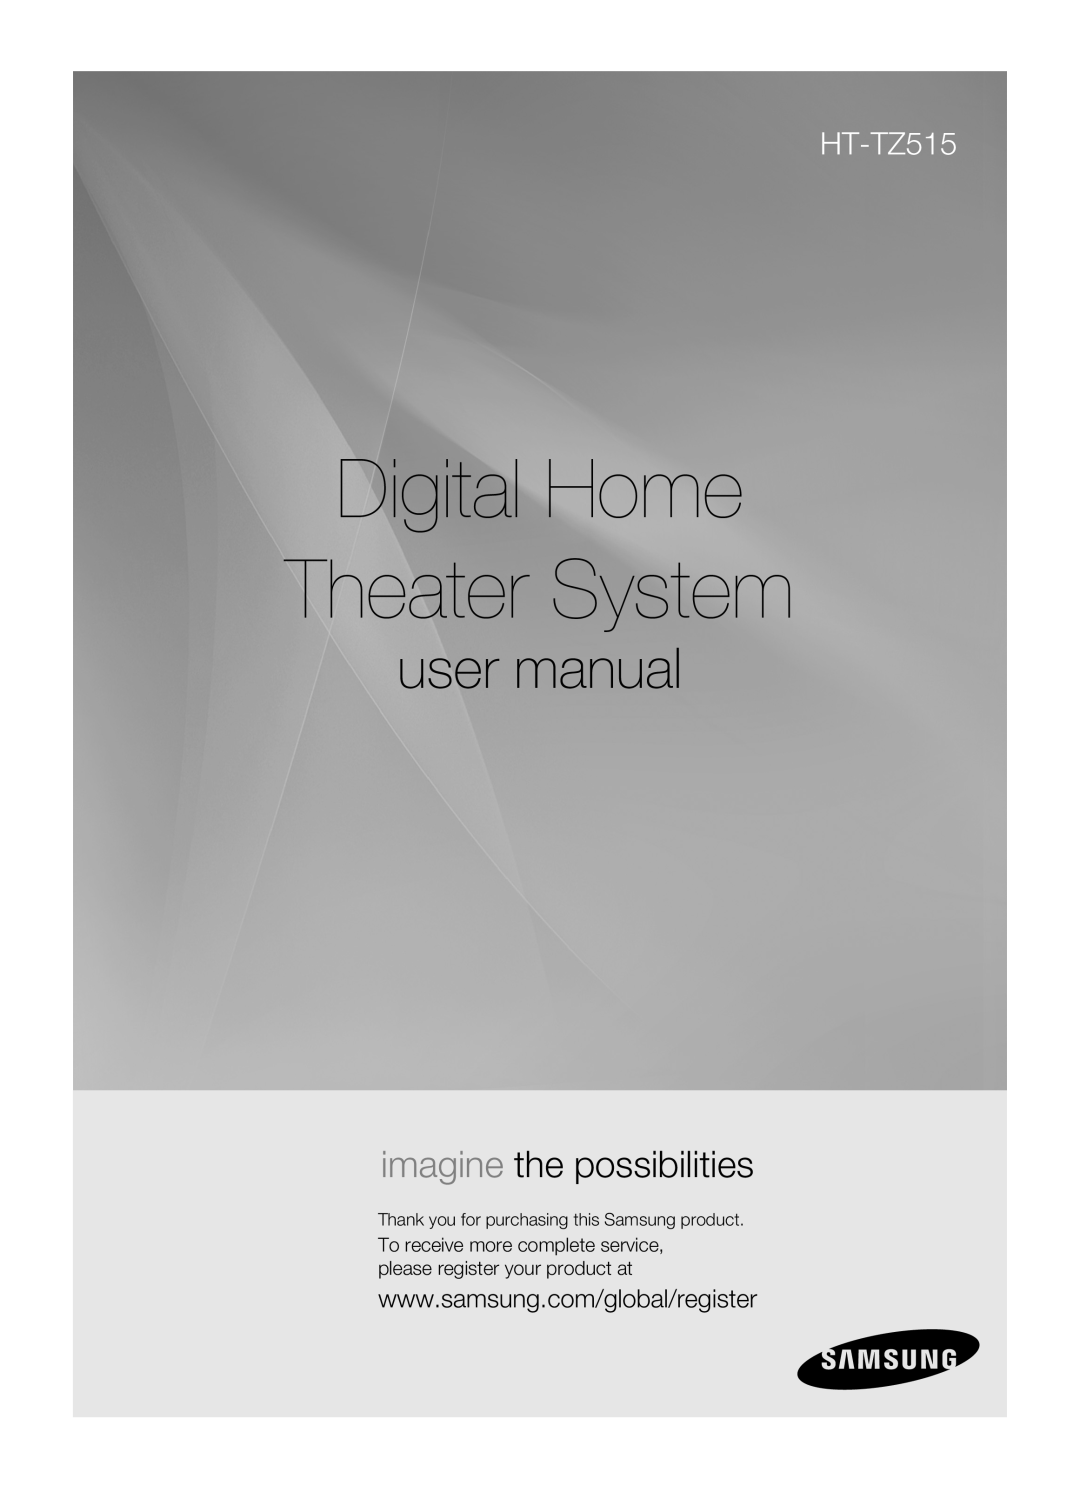 Samsung HT-TZ515 user manual Digital Home Theater System, imagine the possibilities 